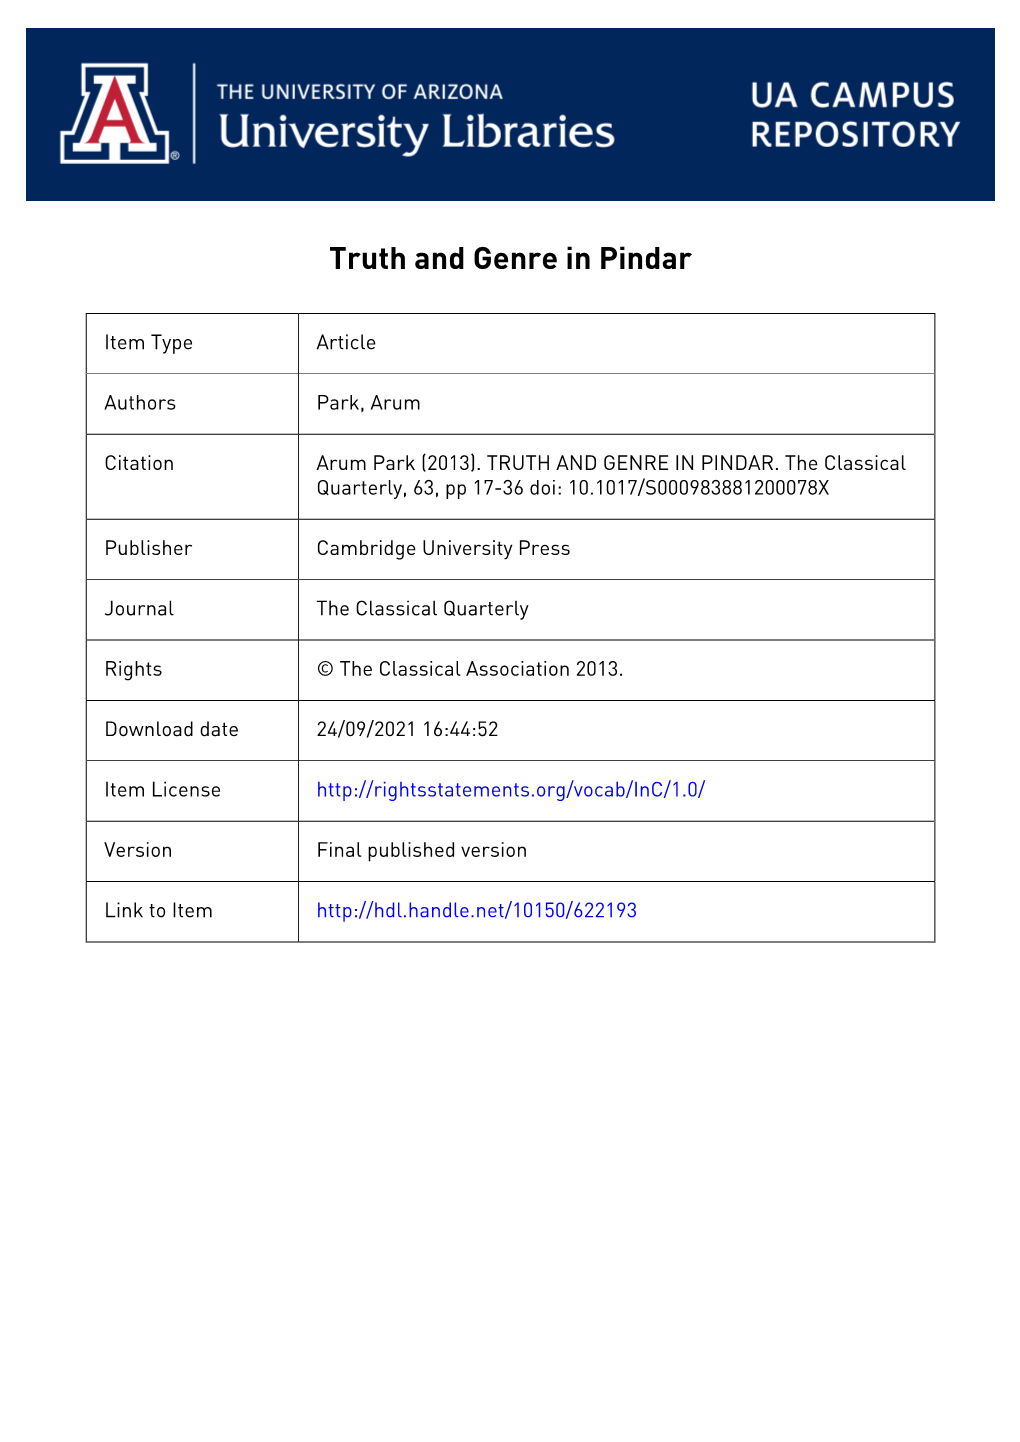 The Classical Quarterly TRUTH and GENRE in PINDAR